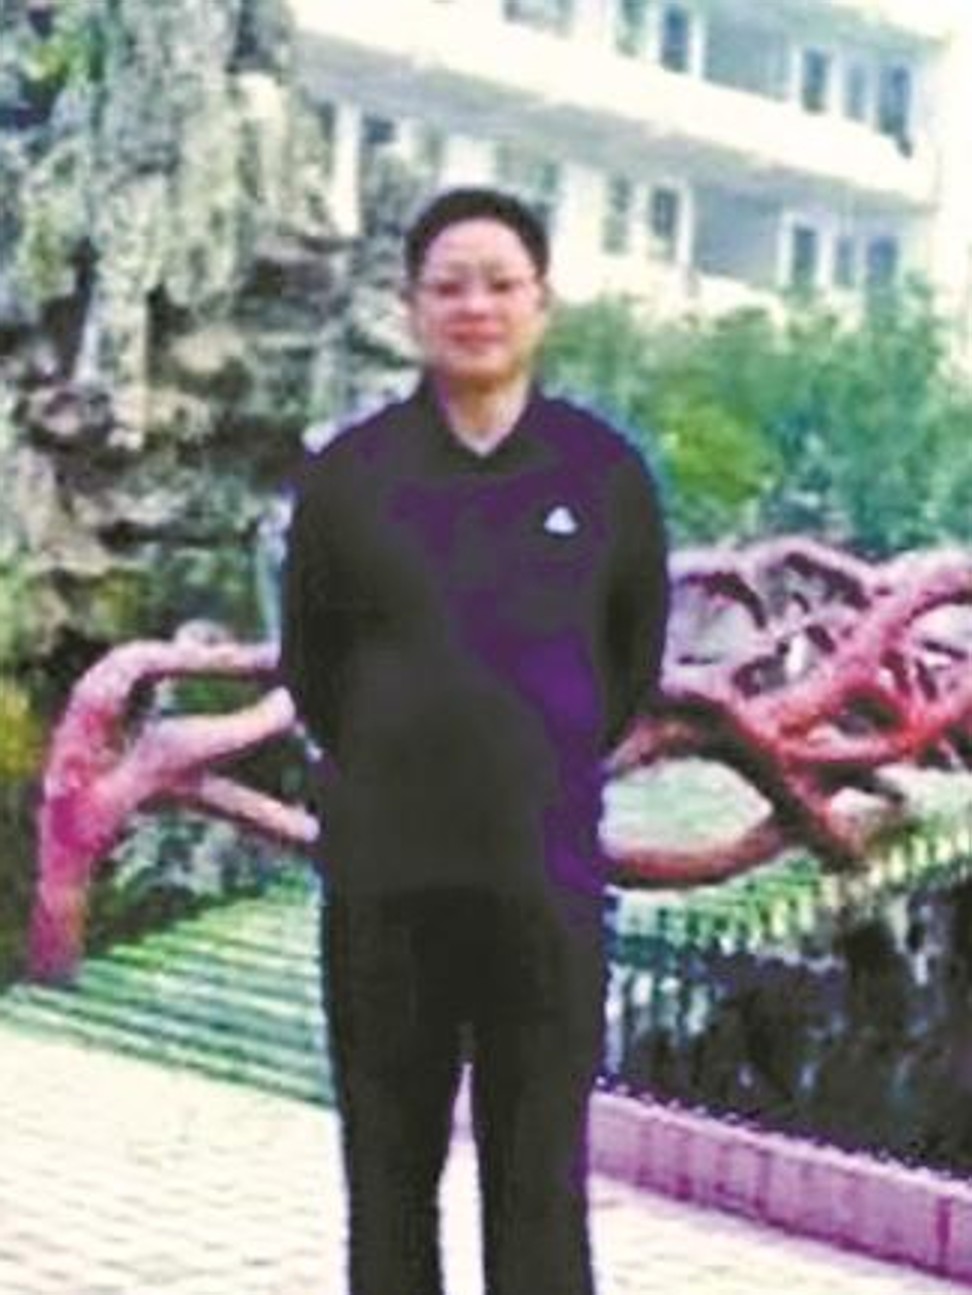 Officials at Yuanjiang No 3 Middle School in Yiyang, Hunan province, described Bao, the teacher who died of stab wounds inflicted by a pupil, as an ‘excellent’ professional. Photo: Weibo